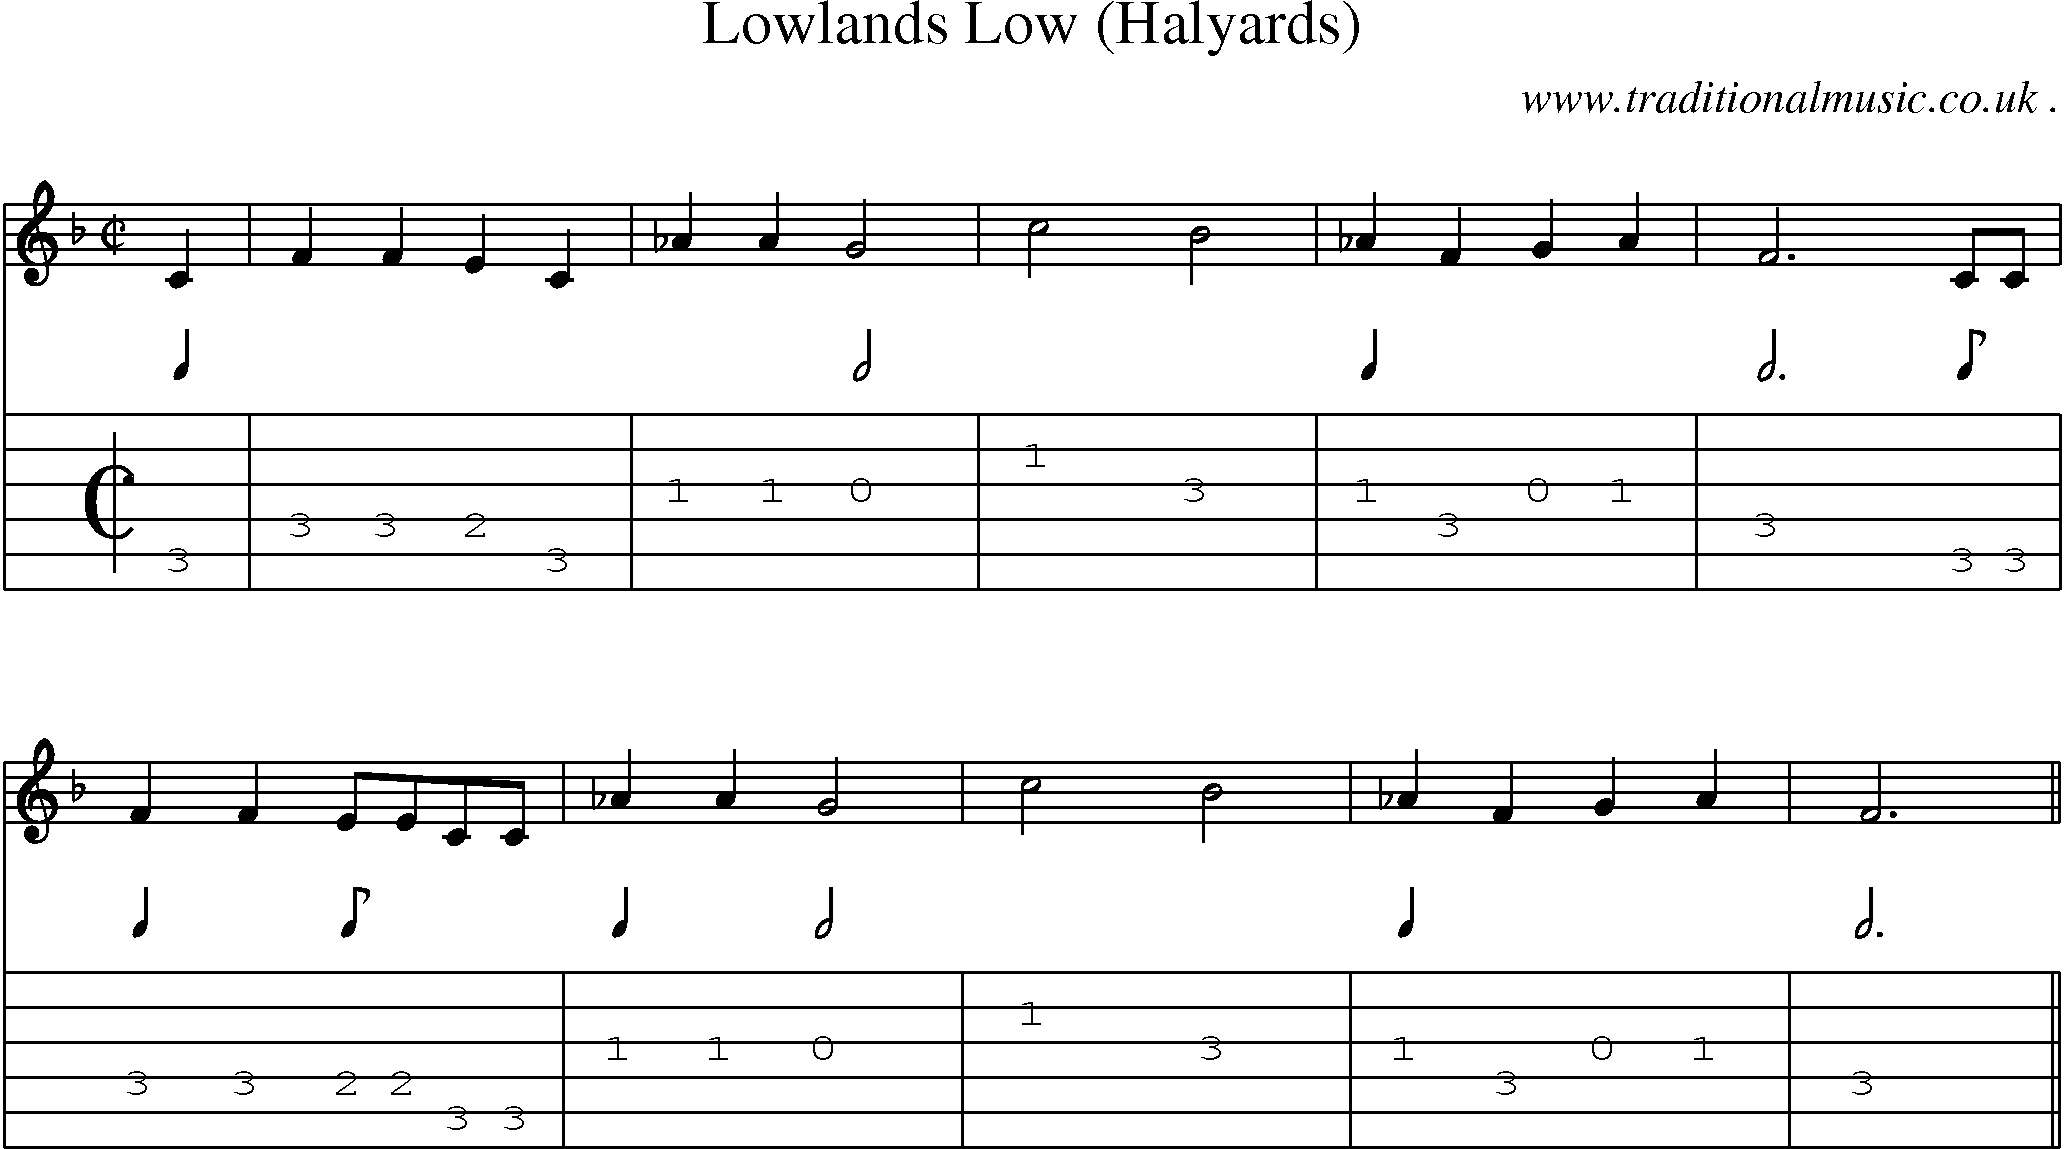 Sheet-Music and Guitar Tabs for Lowlands Low (halyards)